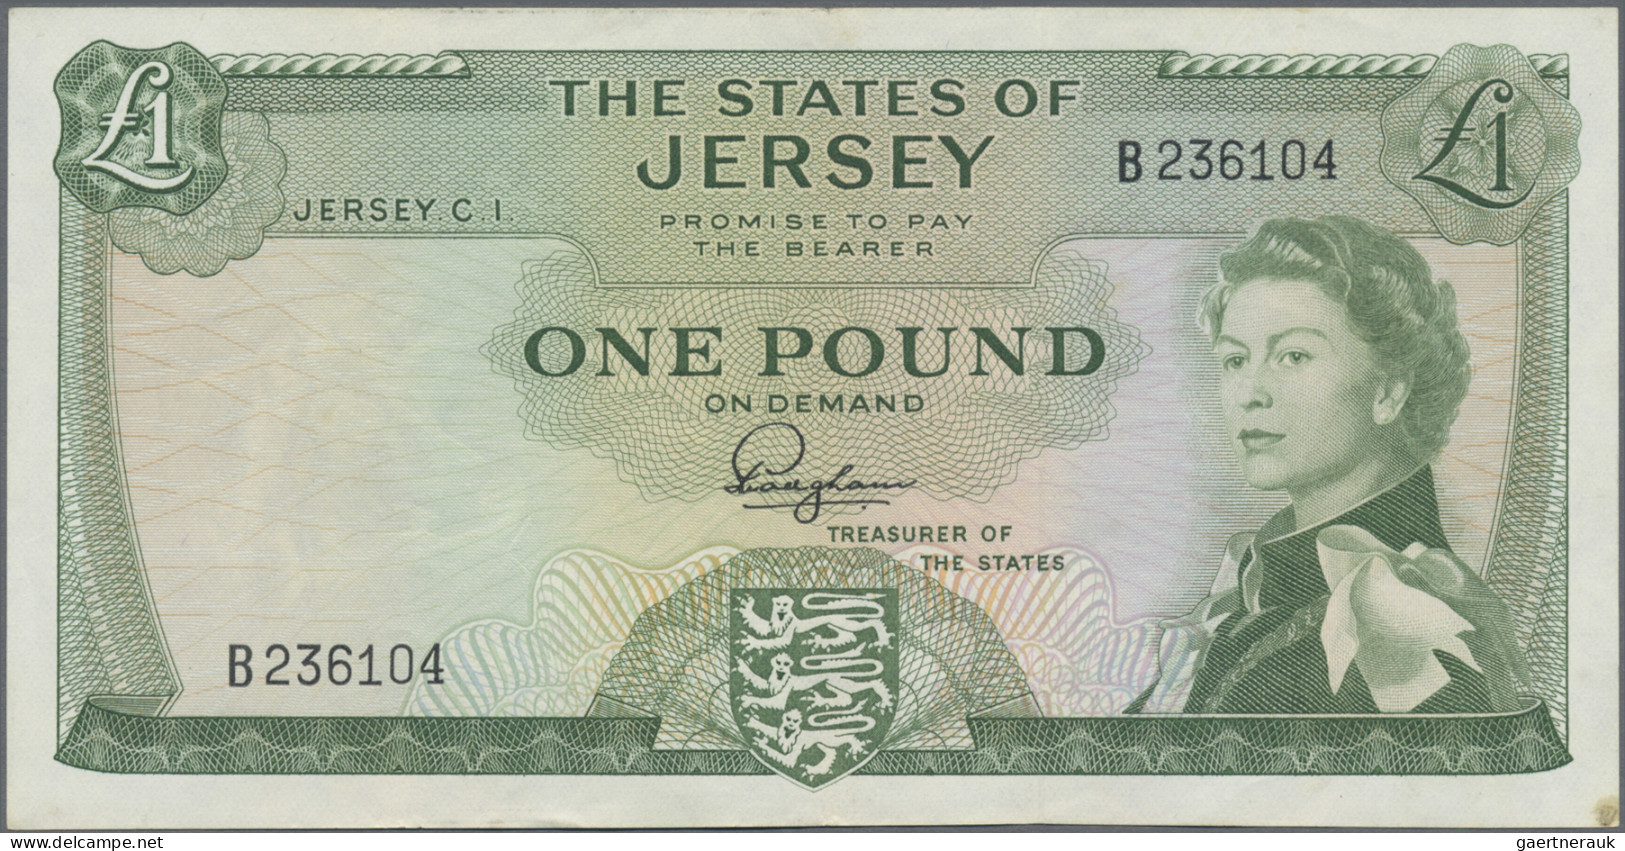 Jersey: The States of Jersey, lot with 4 banknotes, 1963-1972 series, with 10 Sh